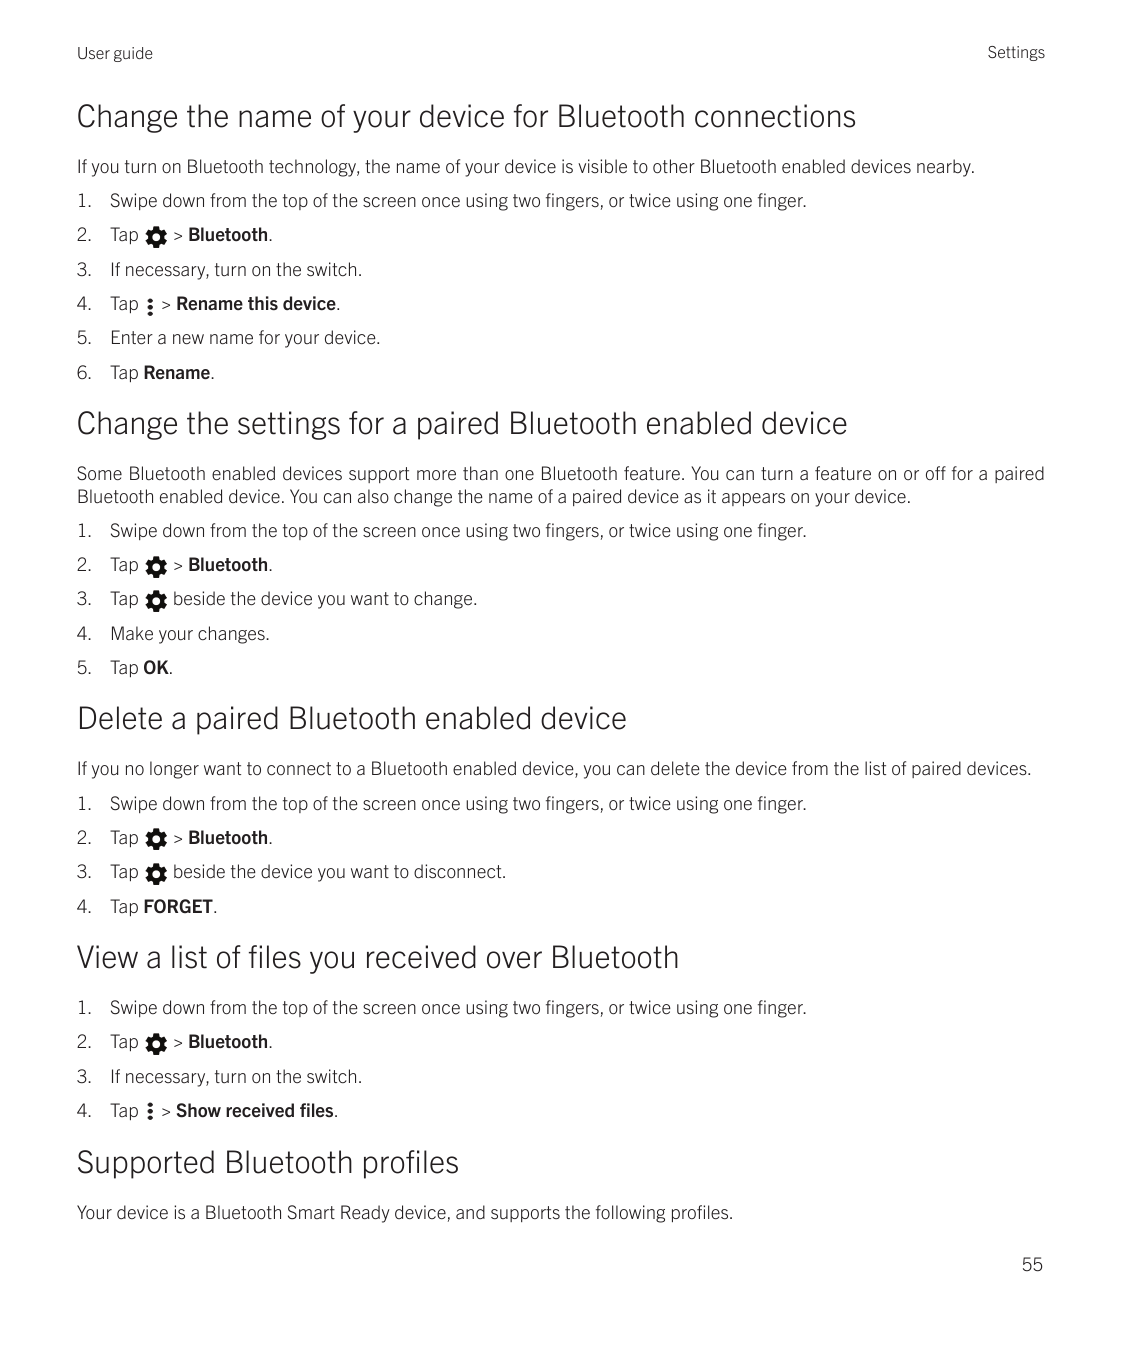 SettingsUser guideChange the name of your device for Bluetooth connectionsIf you turn on Bluetooth technology, the name of your 